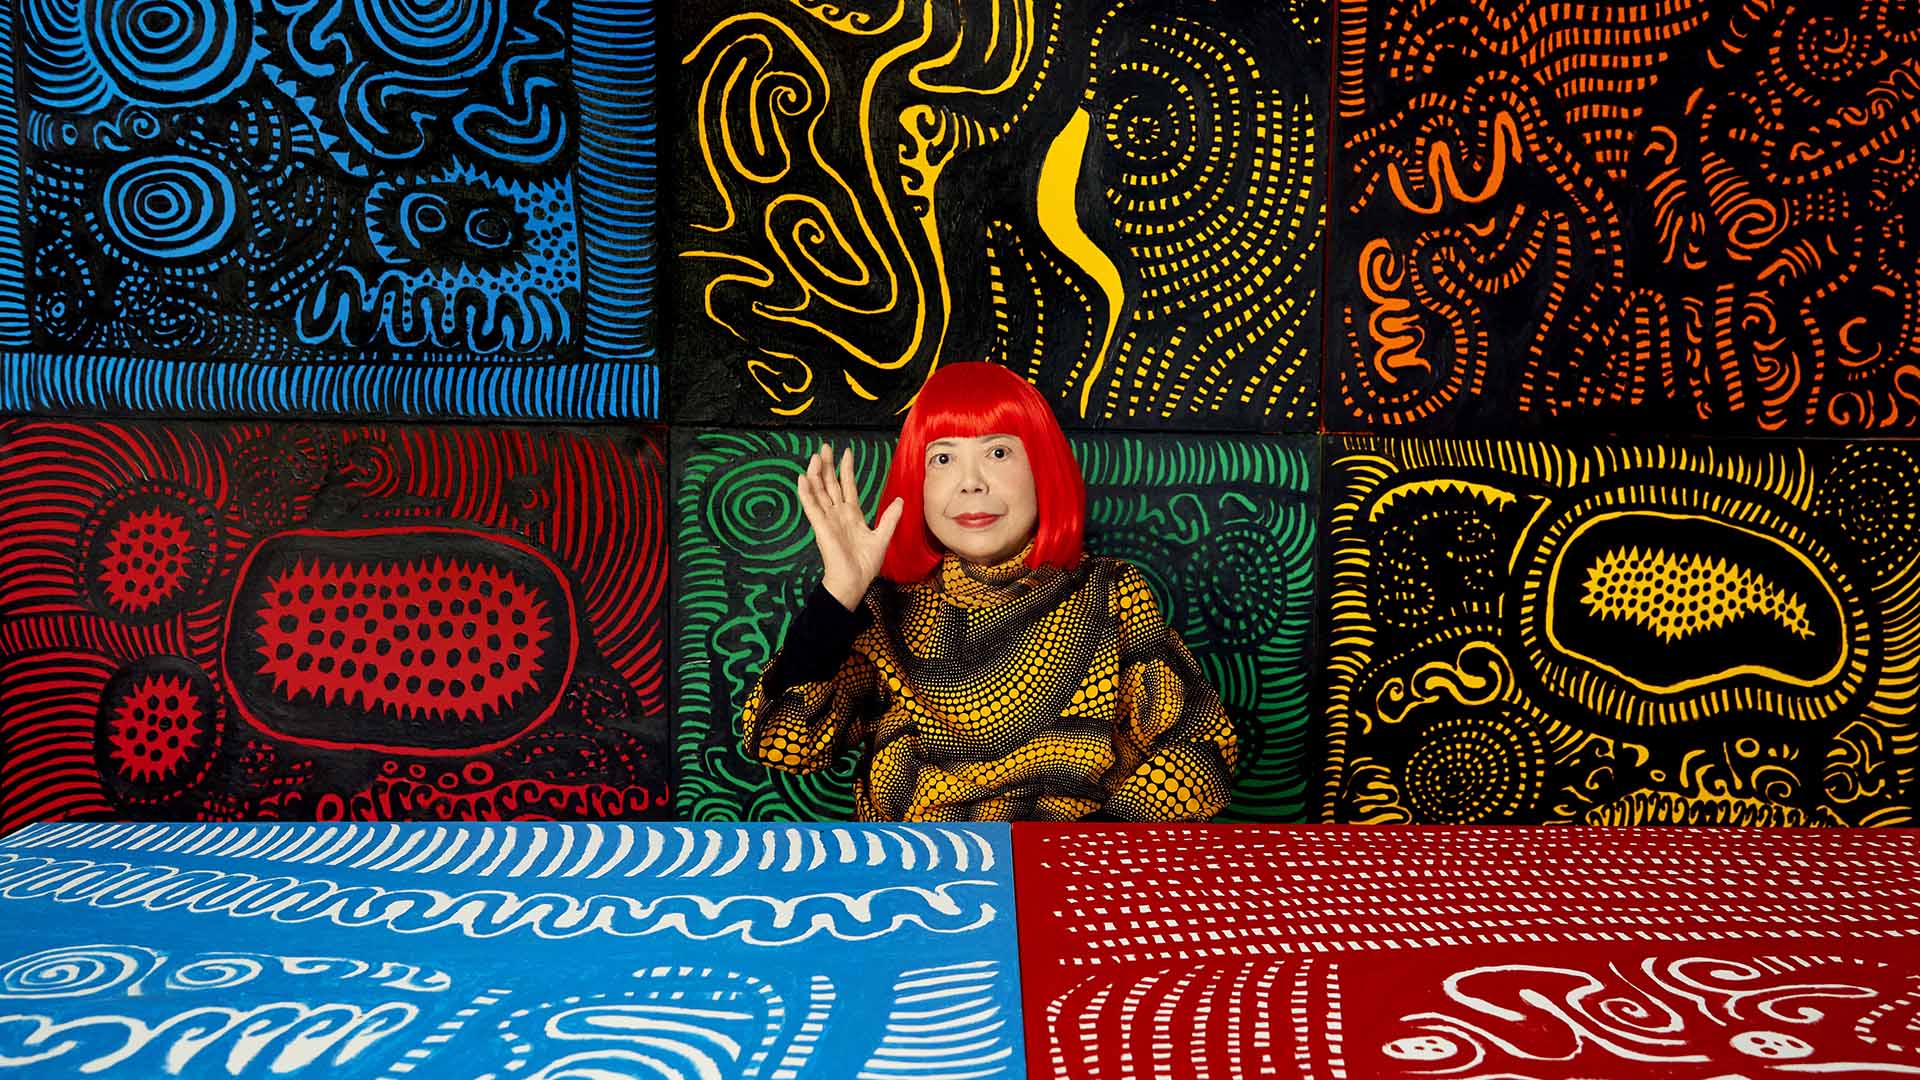 Australia's Biggest-Ever Yayoi Kusama Retrospective Is Coming to the NGV with a Brand-New Infinity Mirror Room